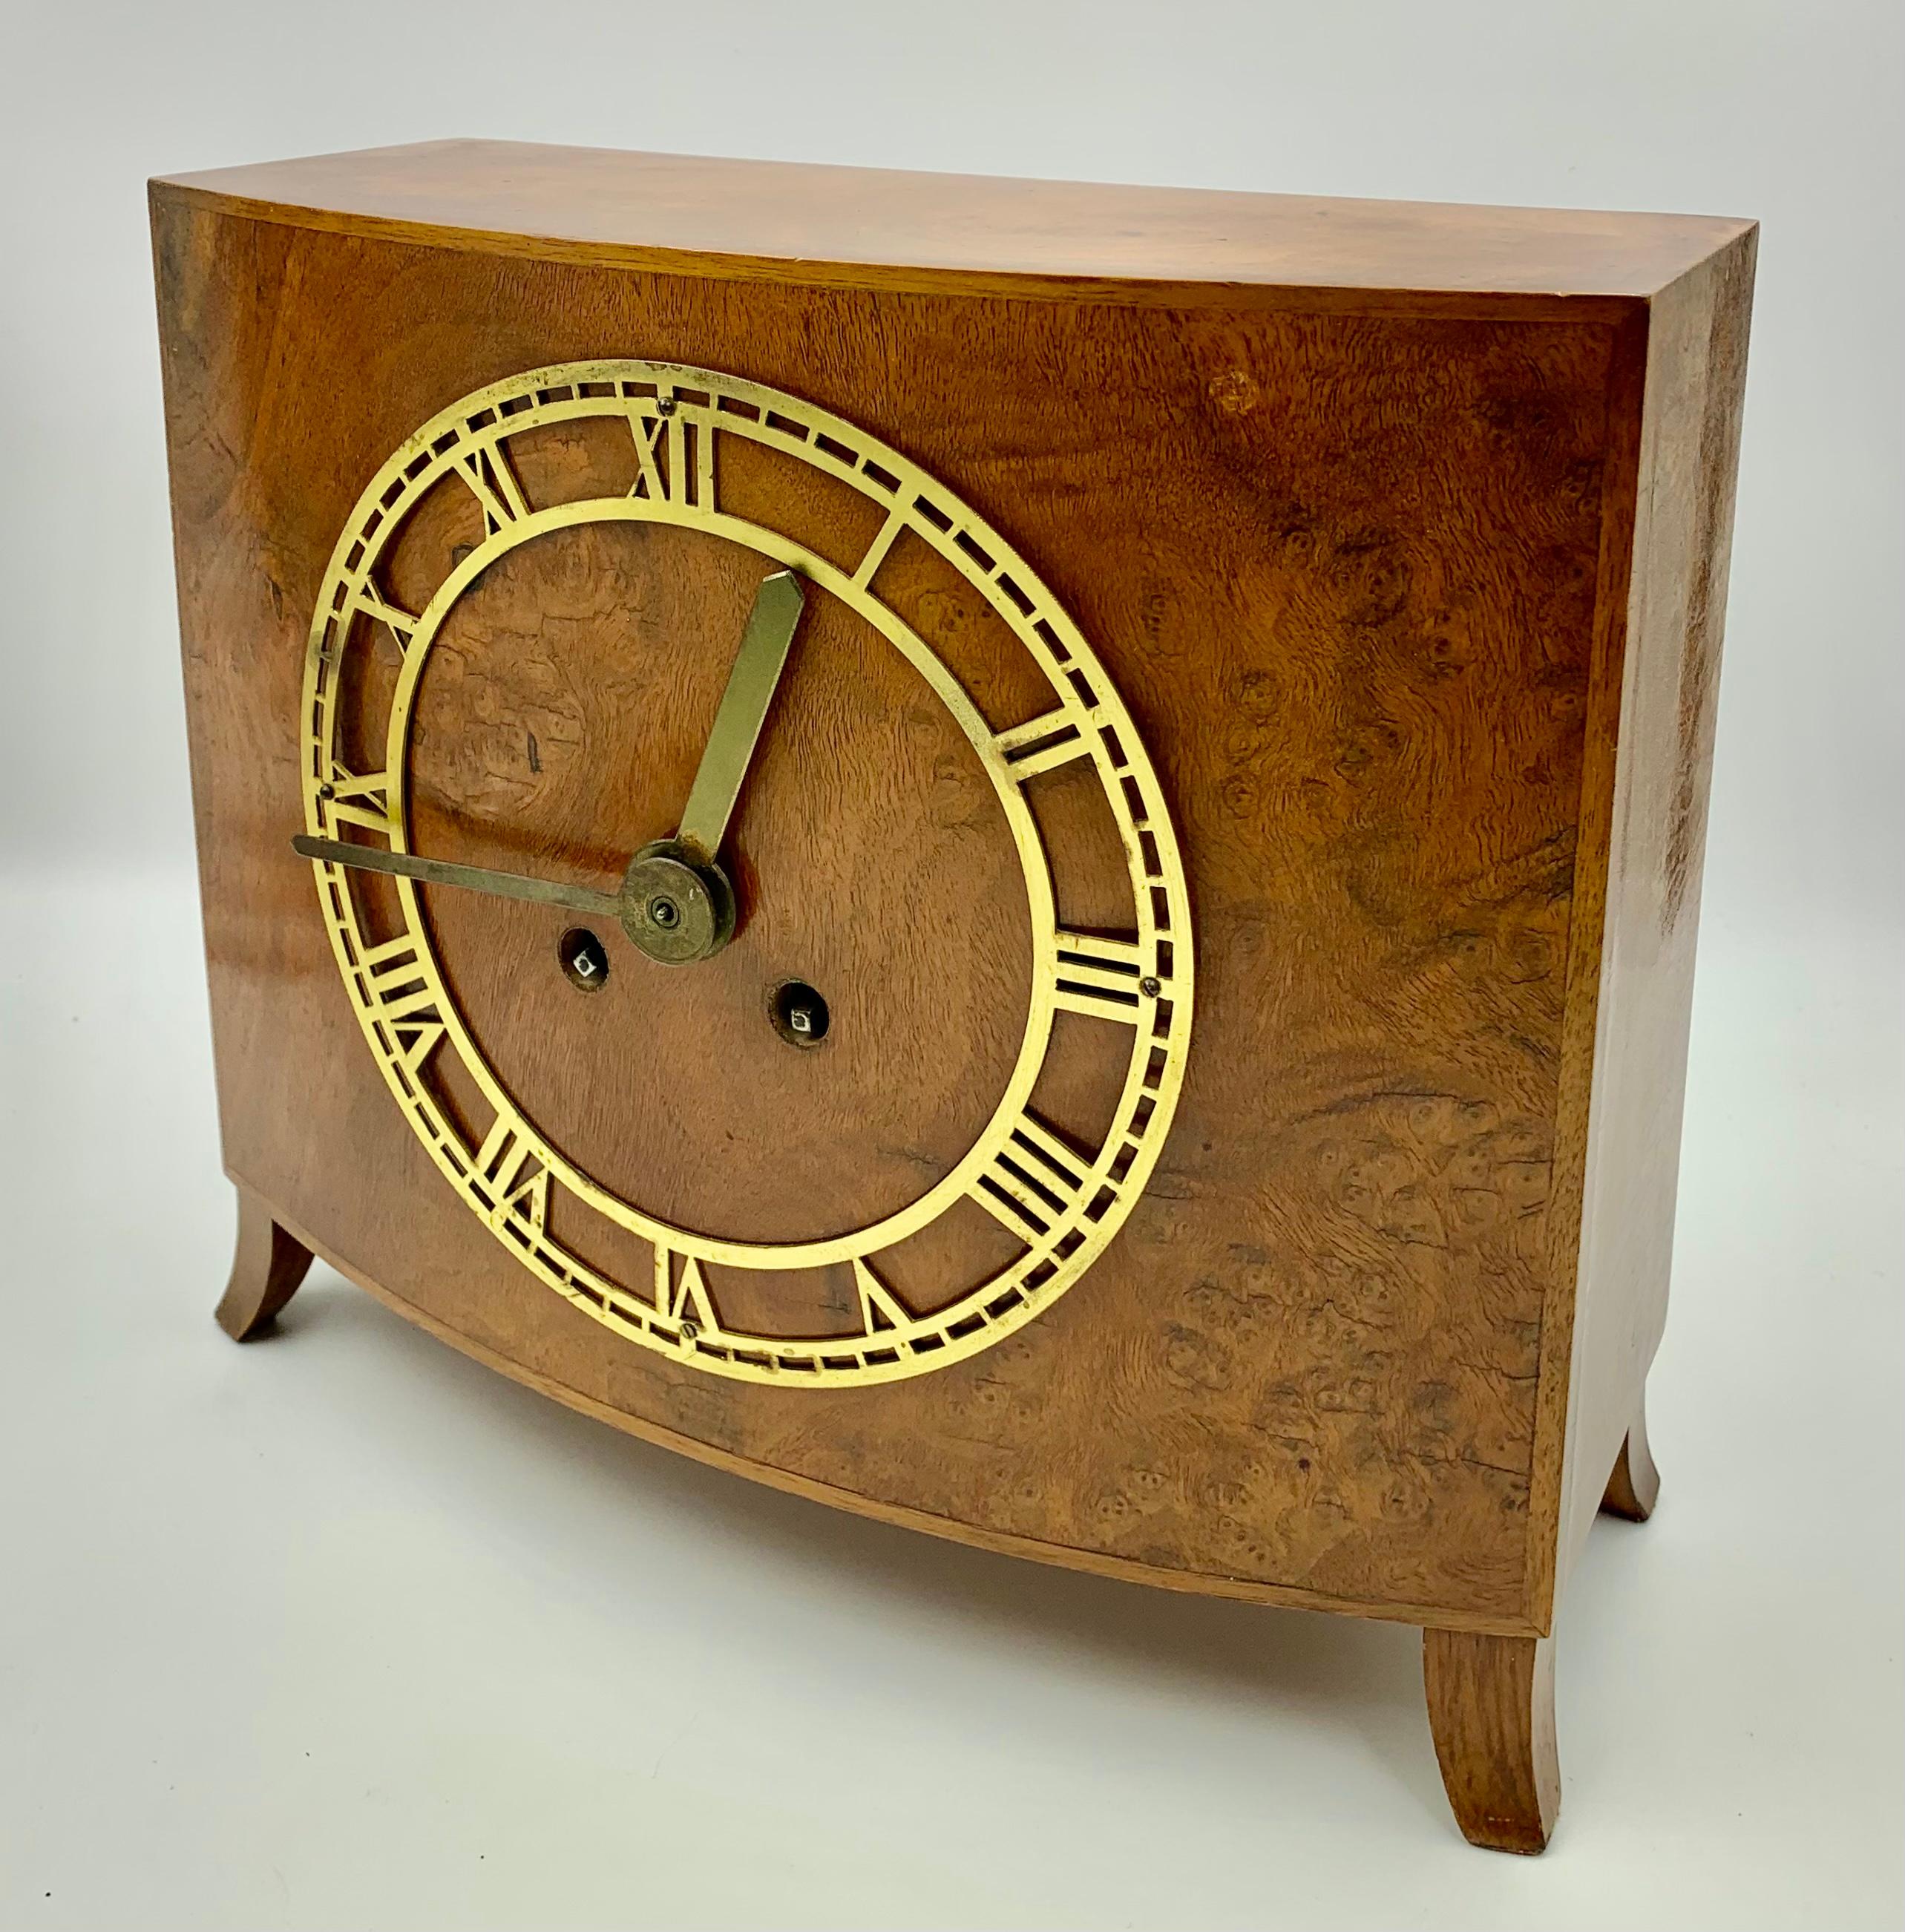 German Art Deco Lenzkirch A U G 2 Million burl walnut clock, 1930's
Stylish Deco blonde burl walnut clock with large round Roman numeral clock face. In working condition with original key. Rear contrasting dark wood doors opening to reveal the